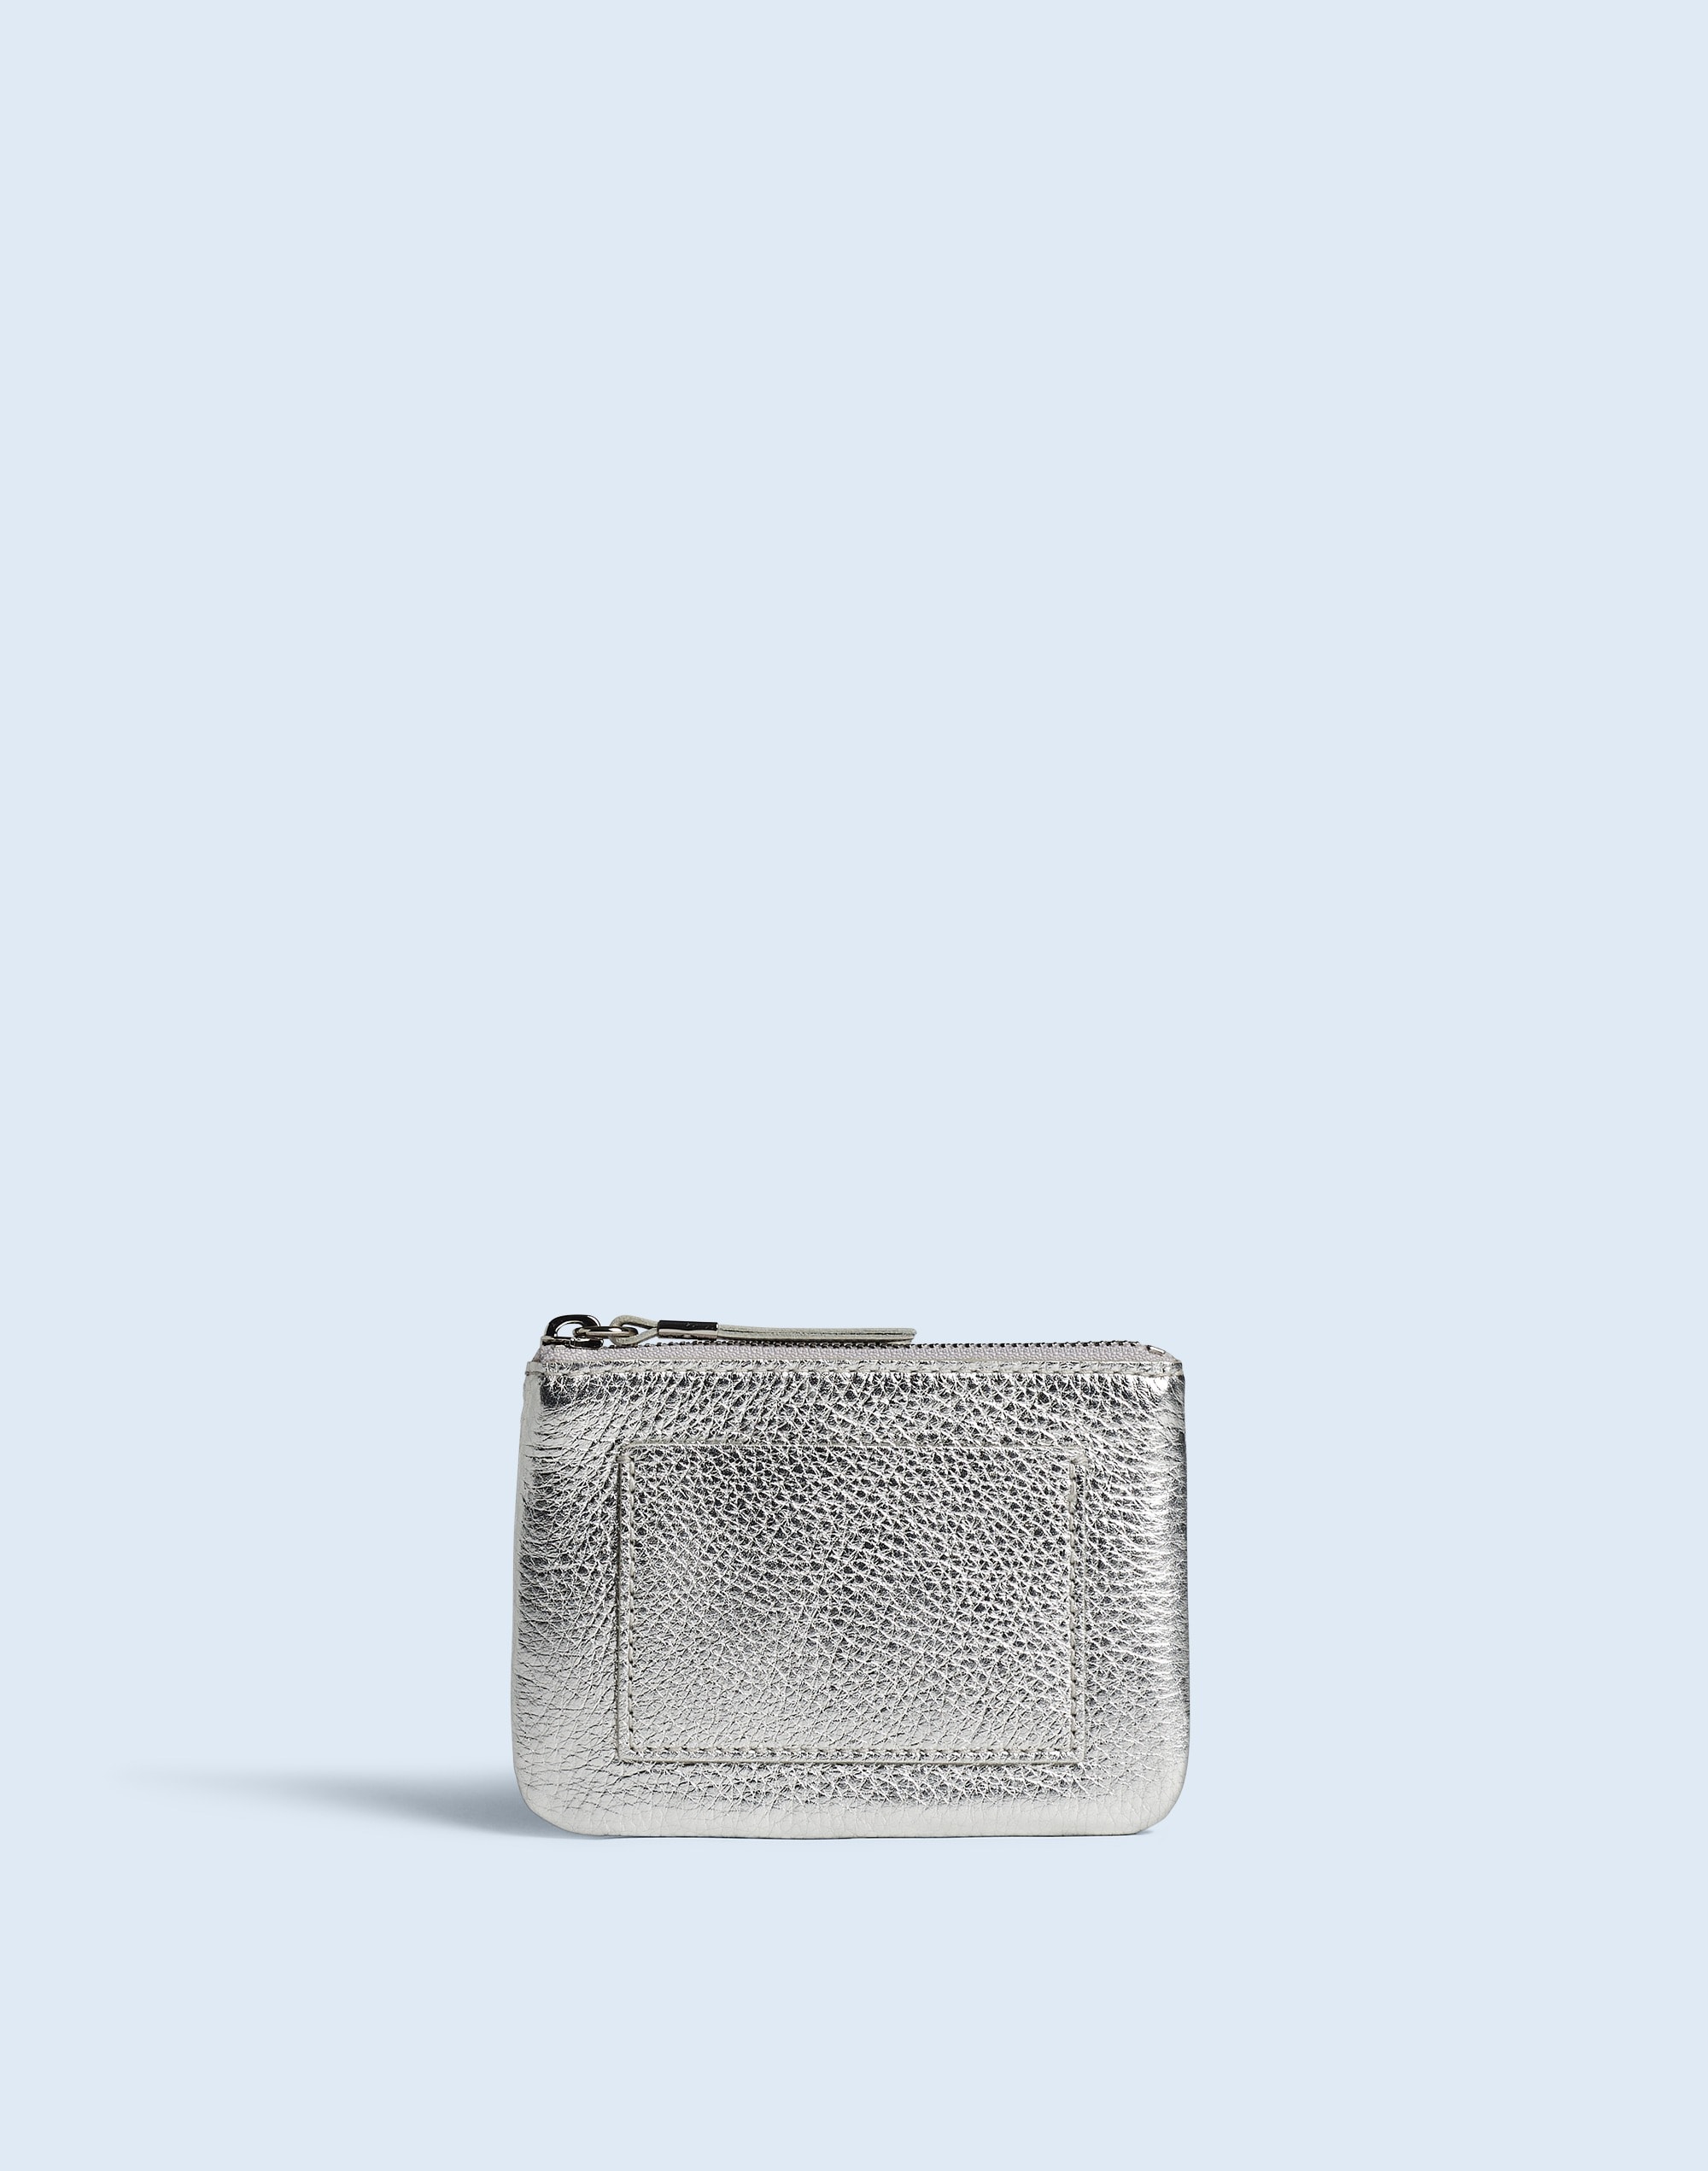 The Small Travel Zip Pouch in Metallic Leather